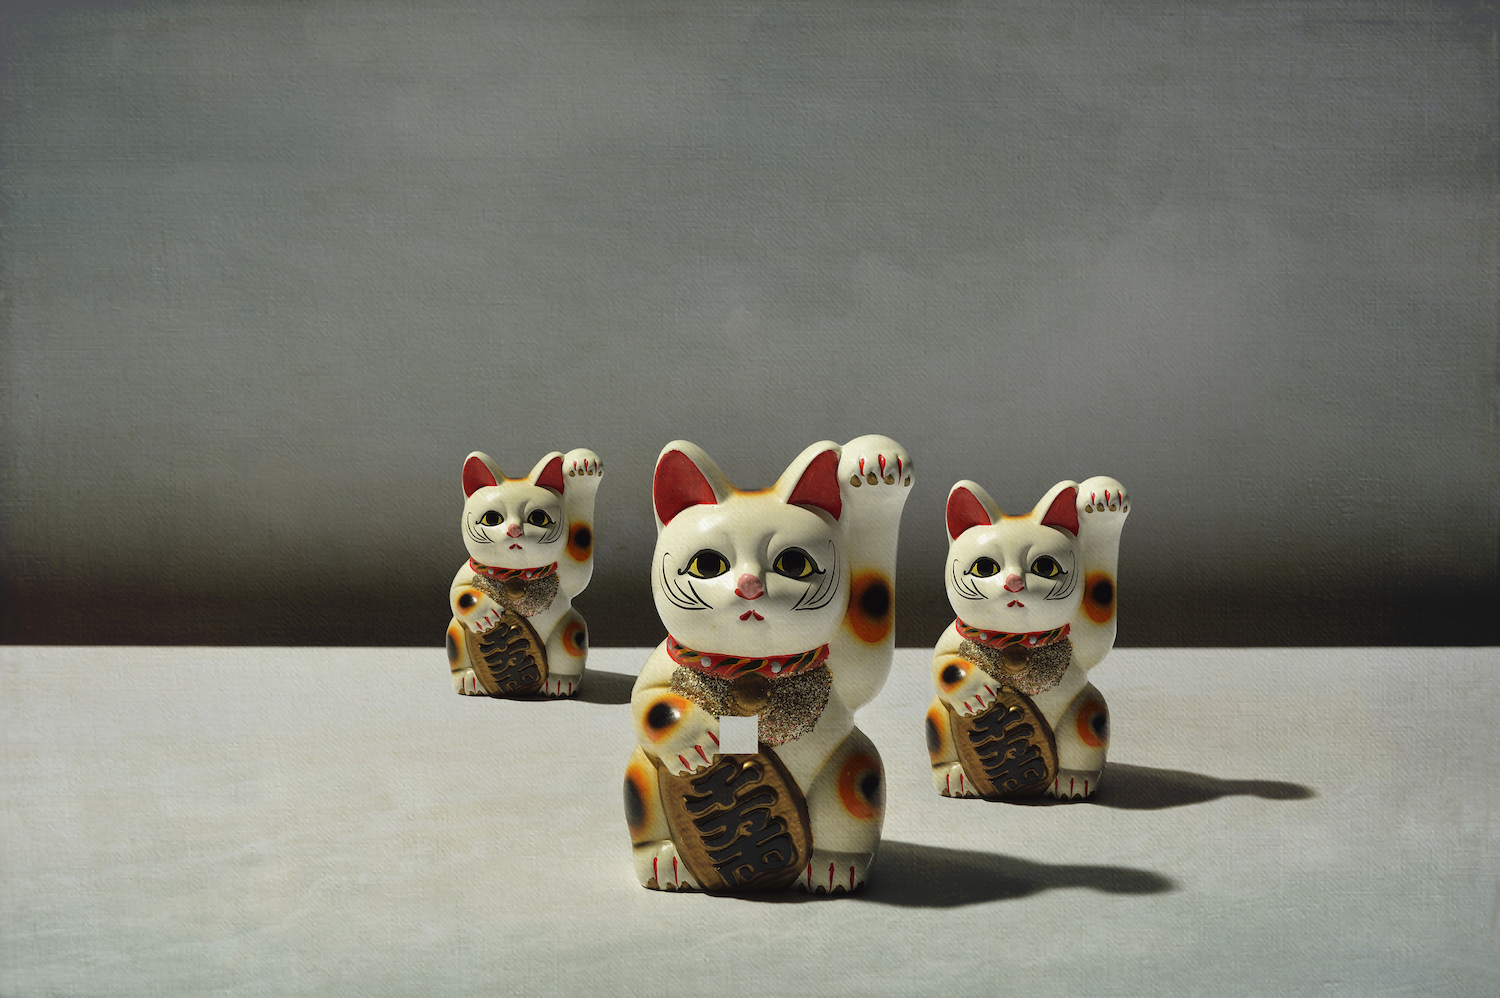 The maneki-neko (literally "beckoning cat") is a common Japanese figurine (lucky charm, talisman) which is often believed to bring good luck to the owner.